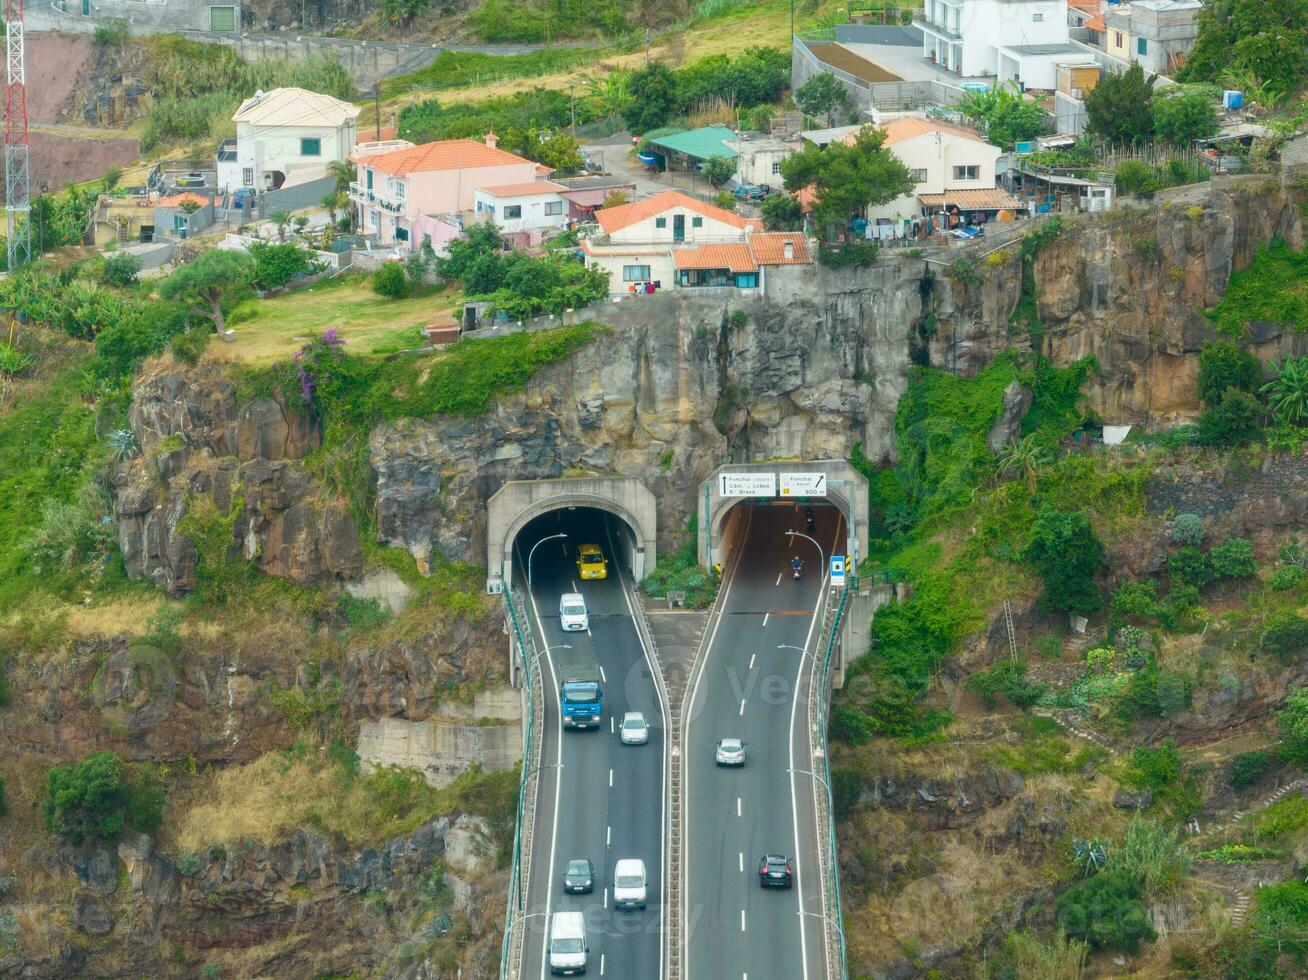 aéreo ver - funchal, Portugal foto